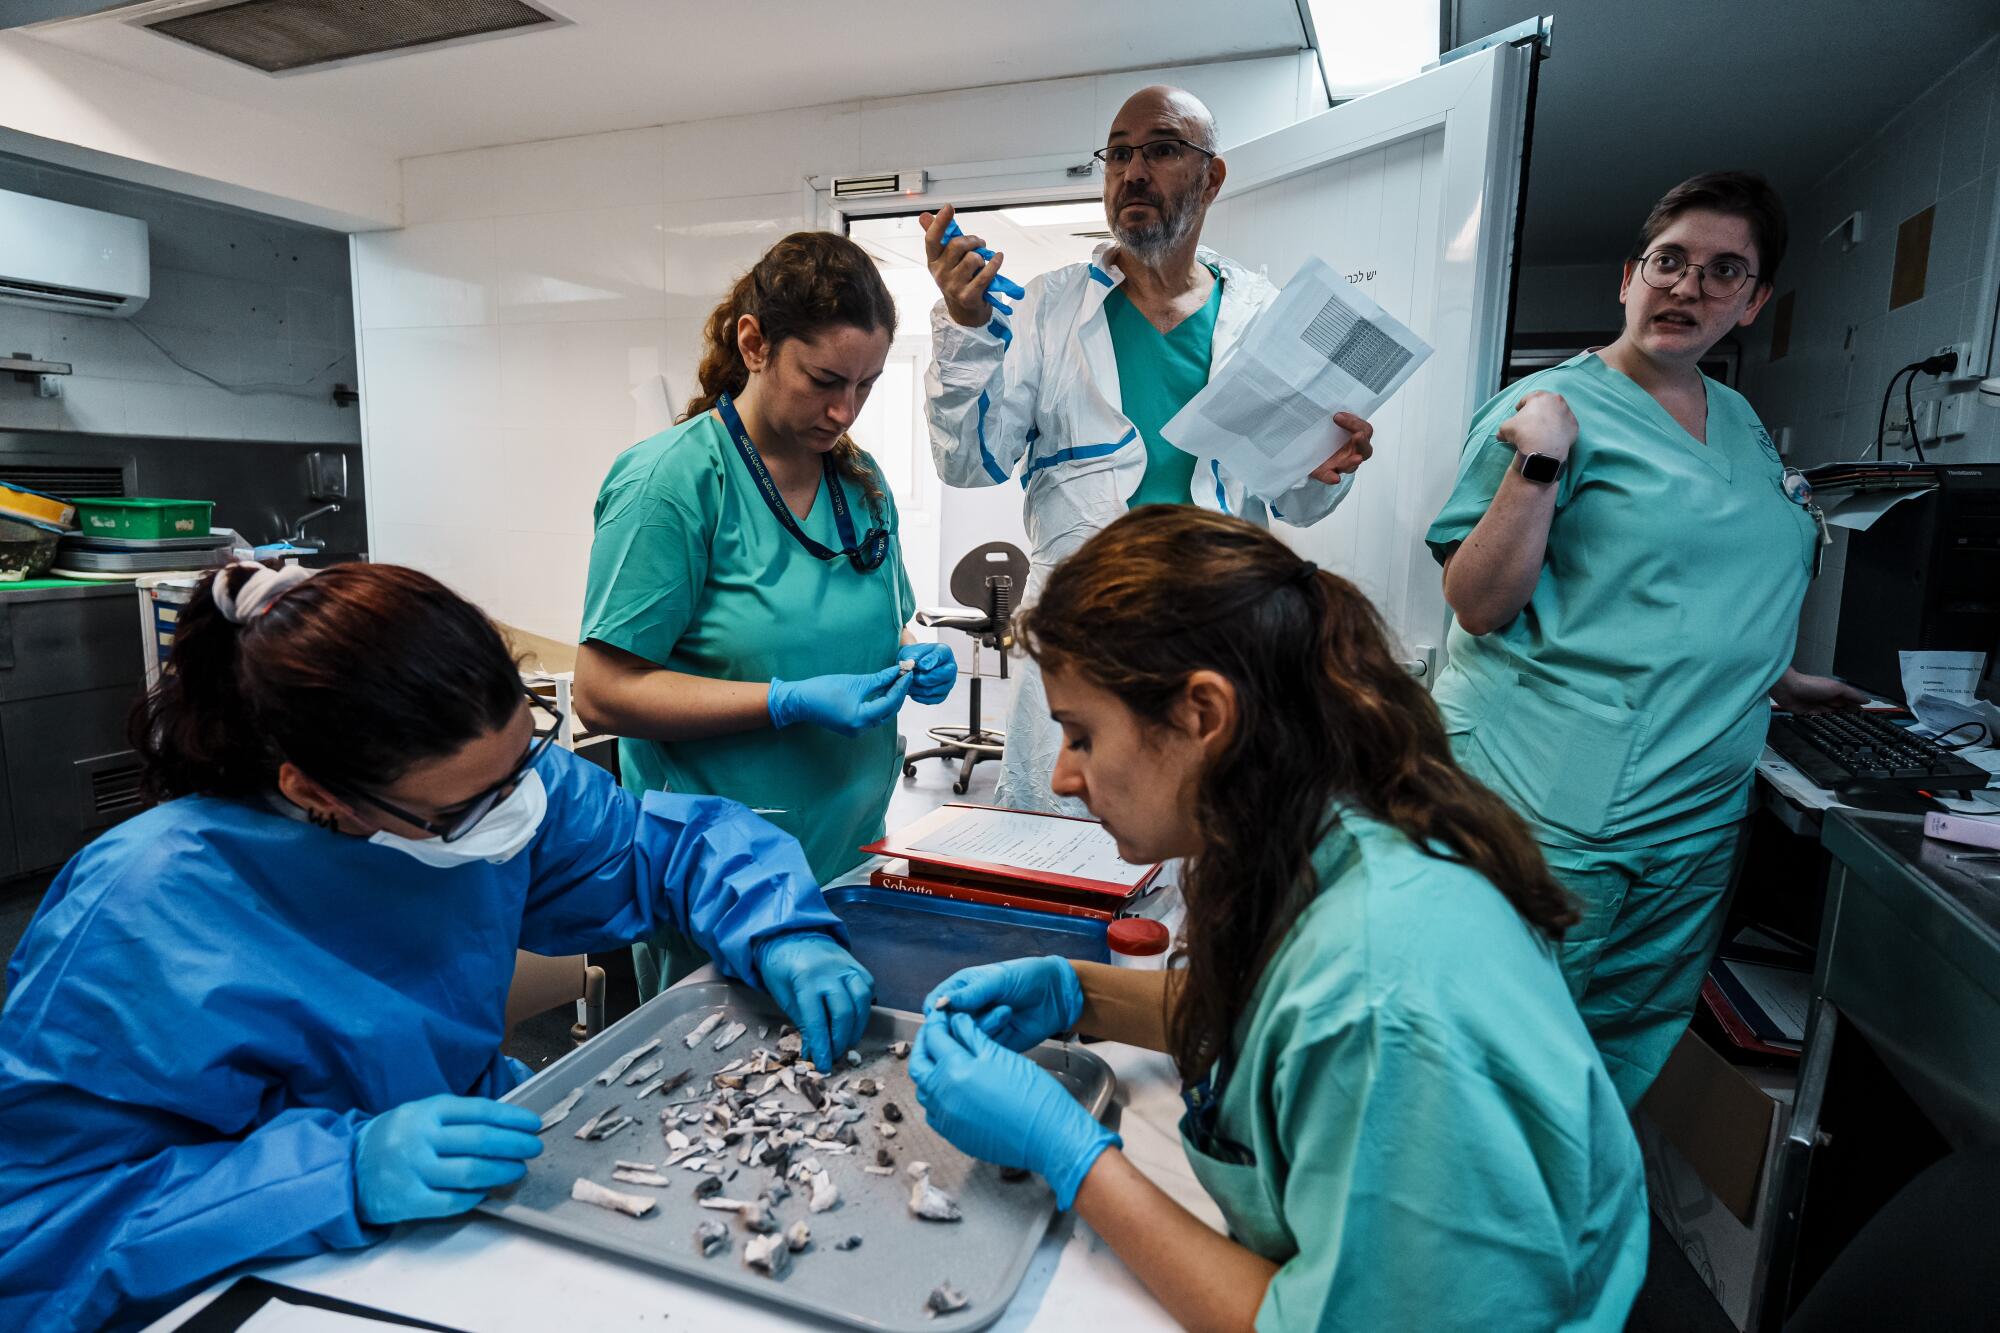  Two women in blue scrubs and gloves sort through fragments on a tray as three other people in scrubs stand nearby 